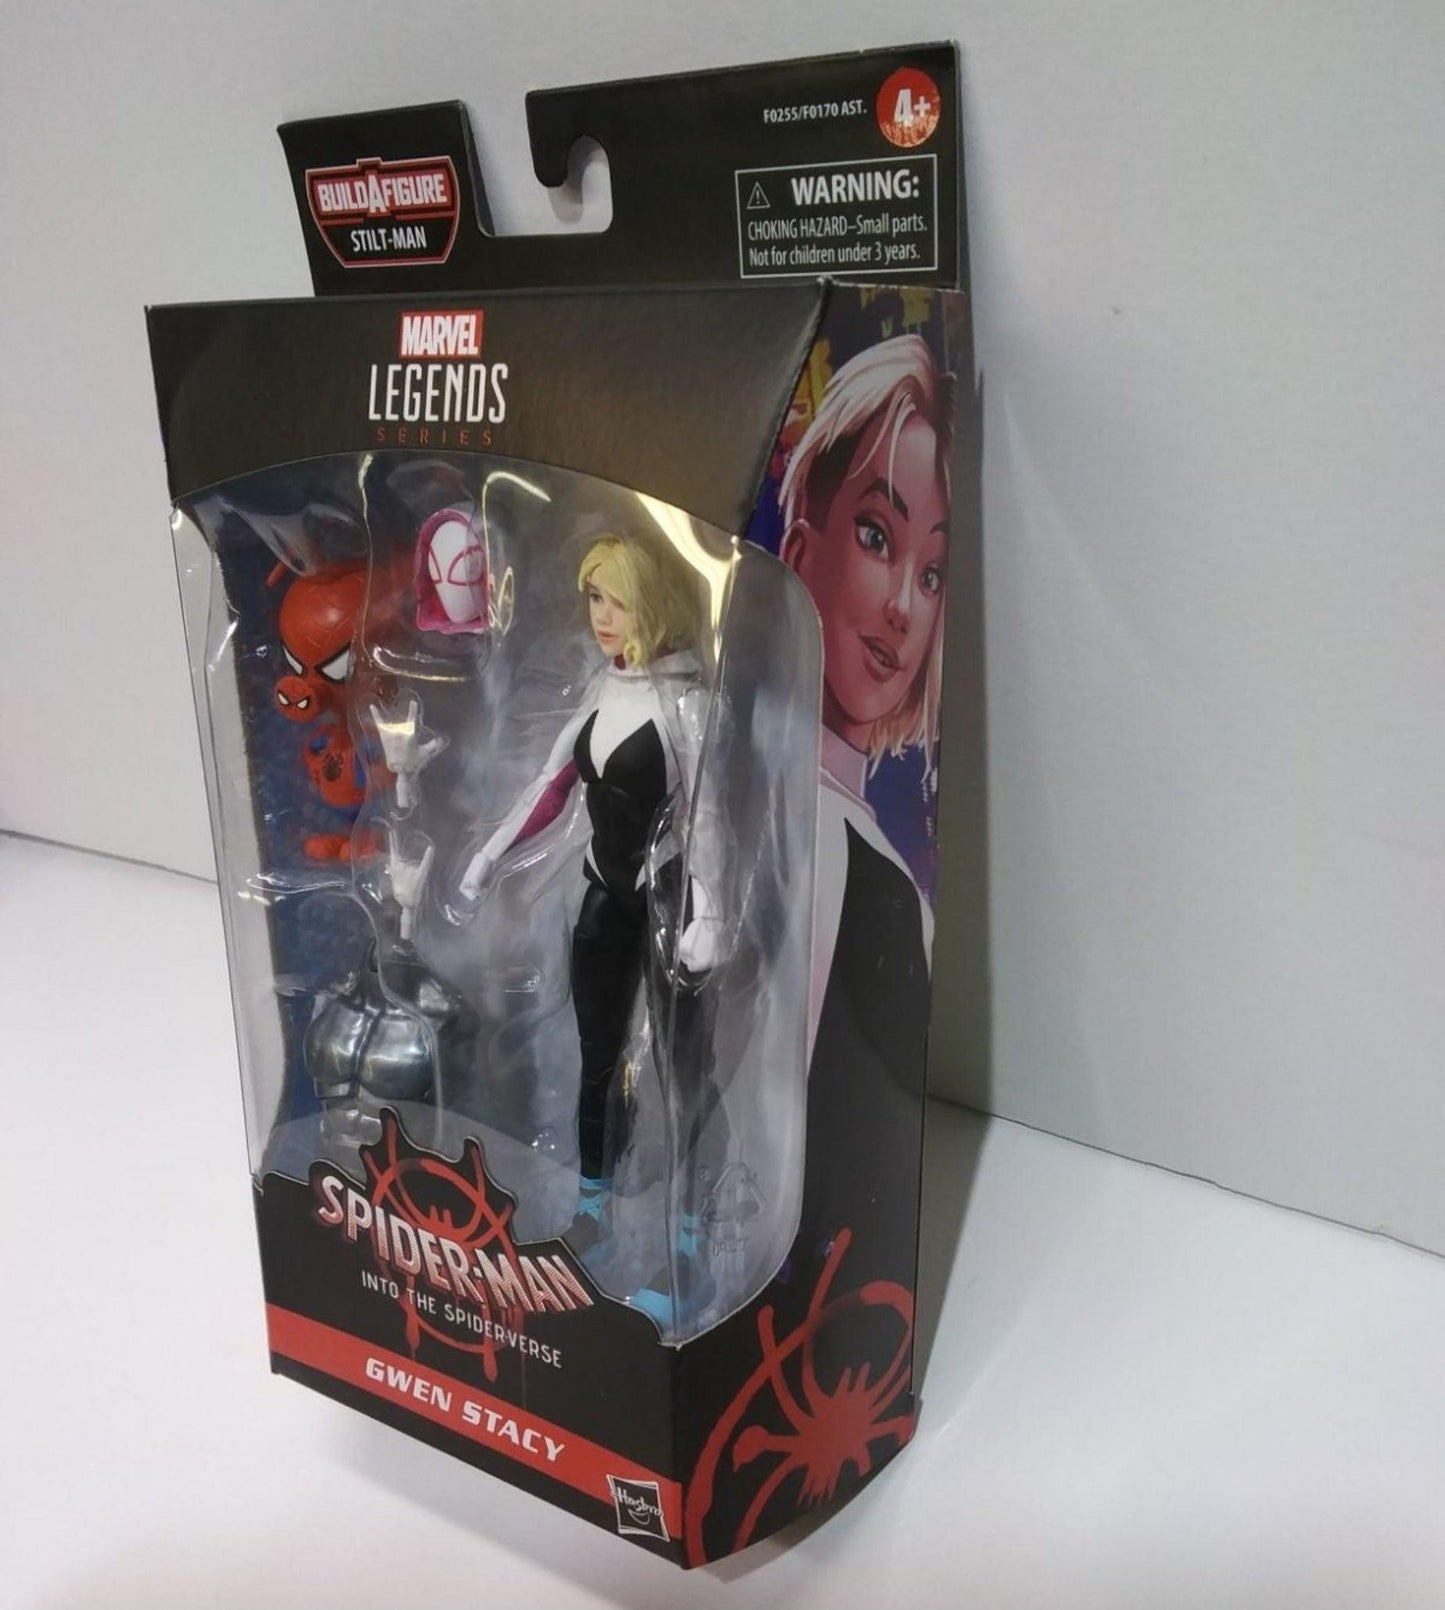 Hasbro Build a Figure Marvel Legends Series Gwen Stacy Spider-Man - Logan's Toy Chest